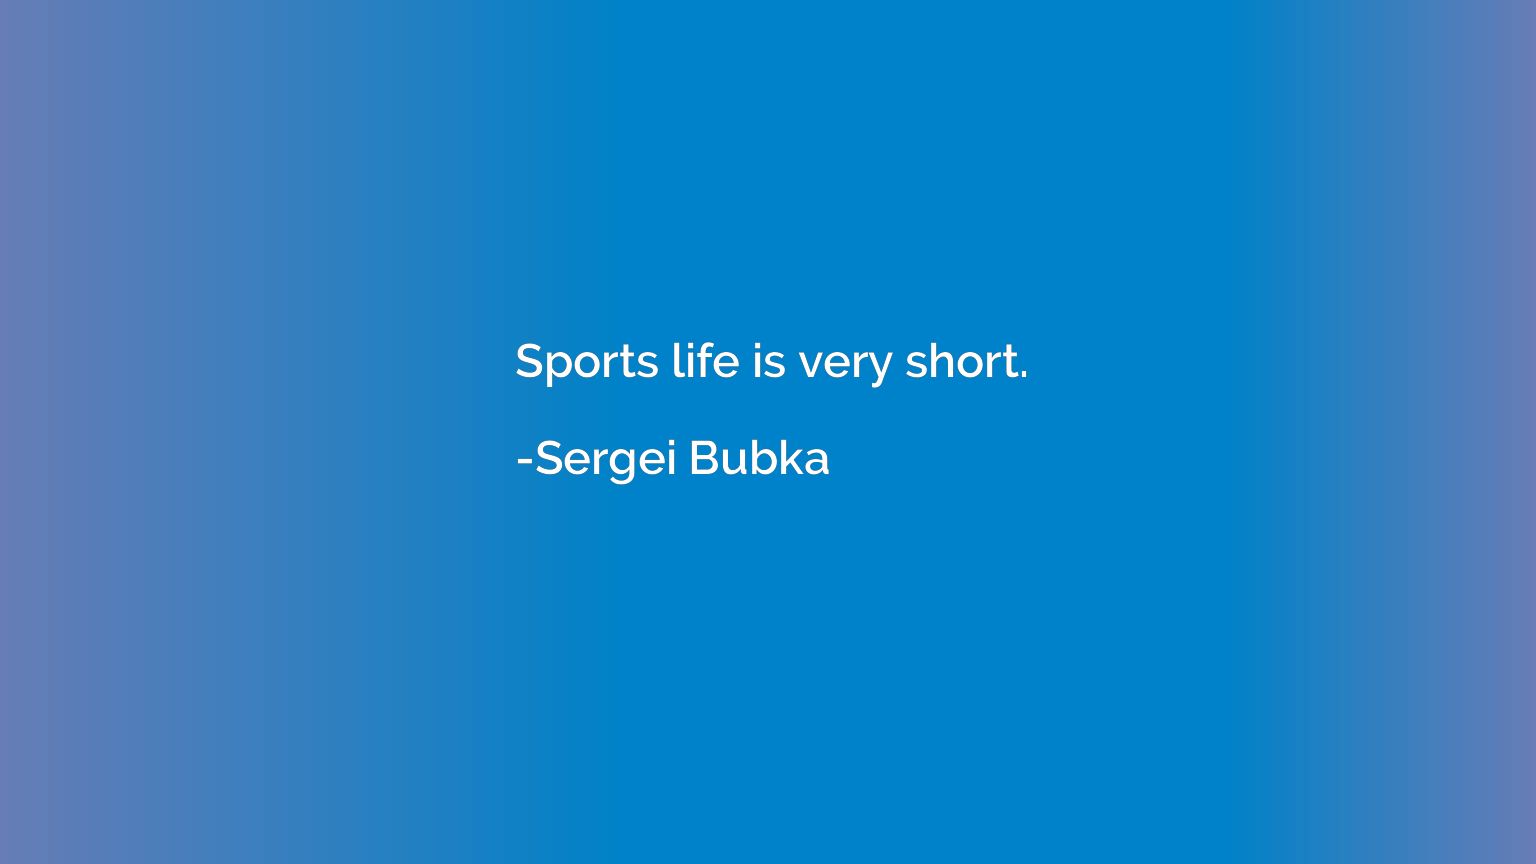 Sports life is very short.